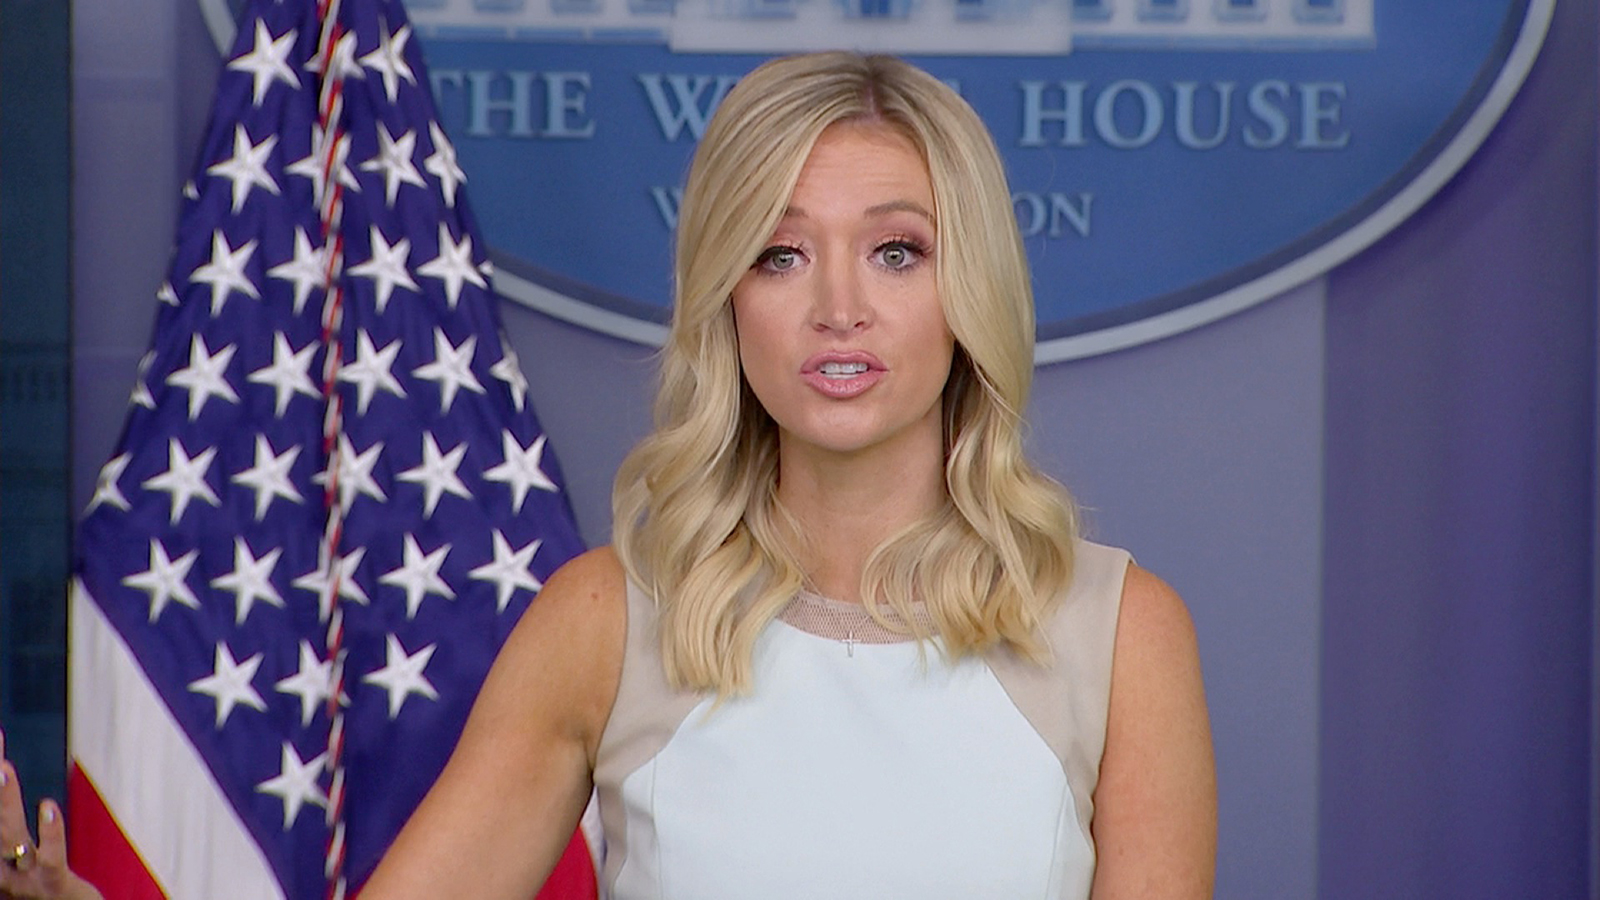 Kayleigh McEnany, White House press secretary, speaks during a news conference in Washington, DC on July 6.